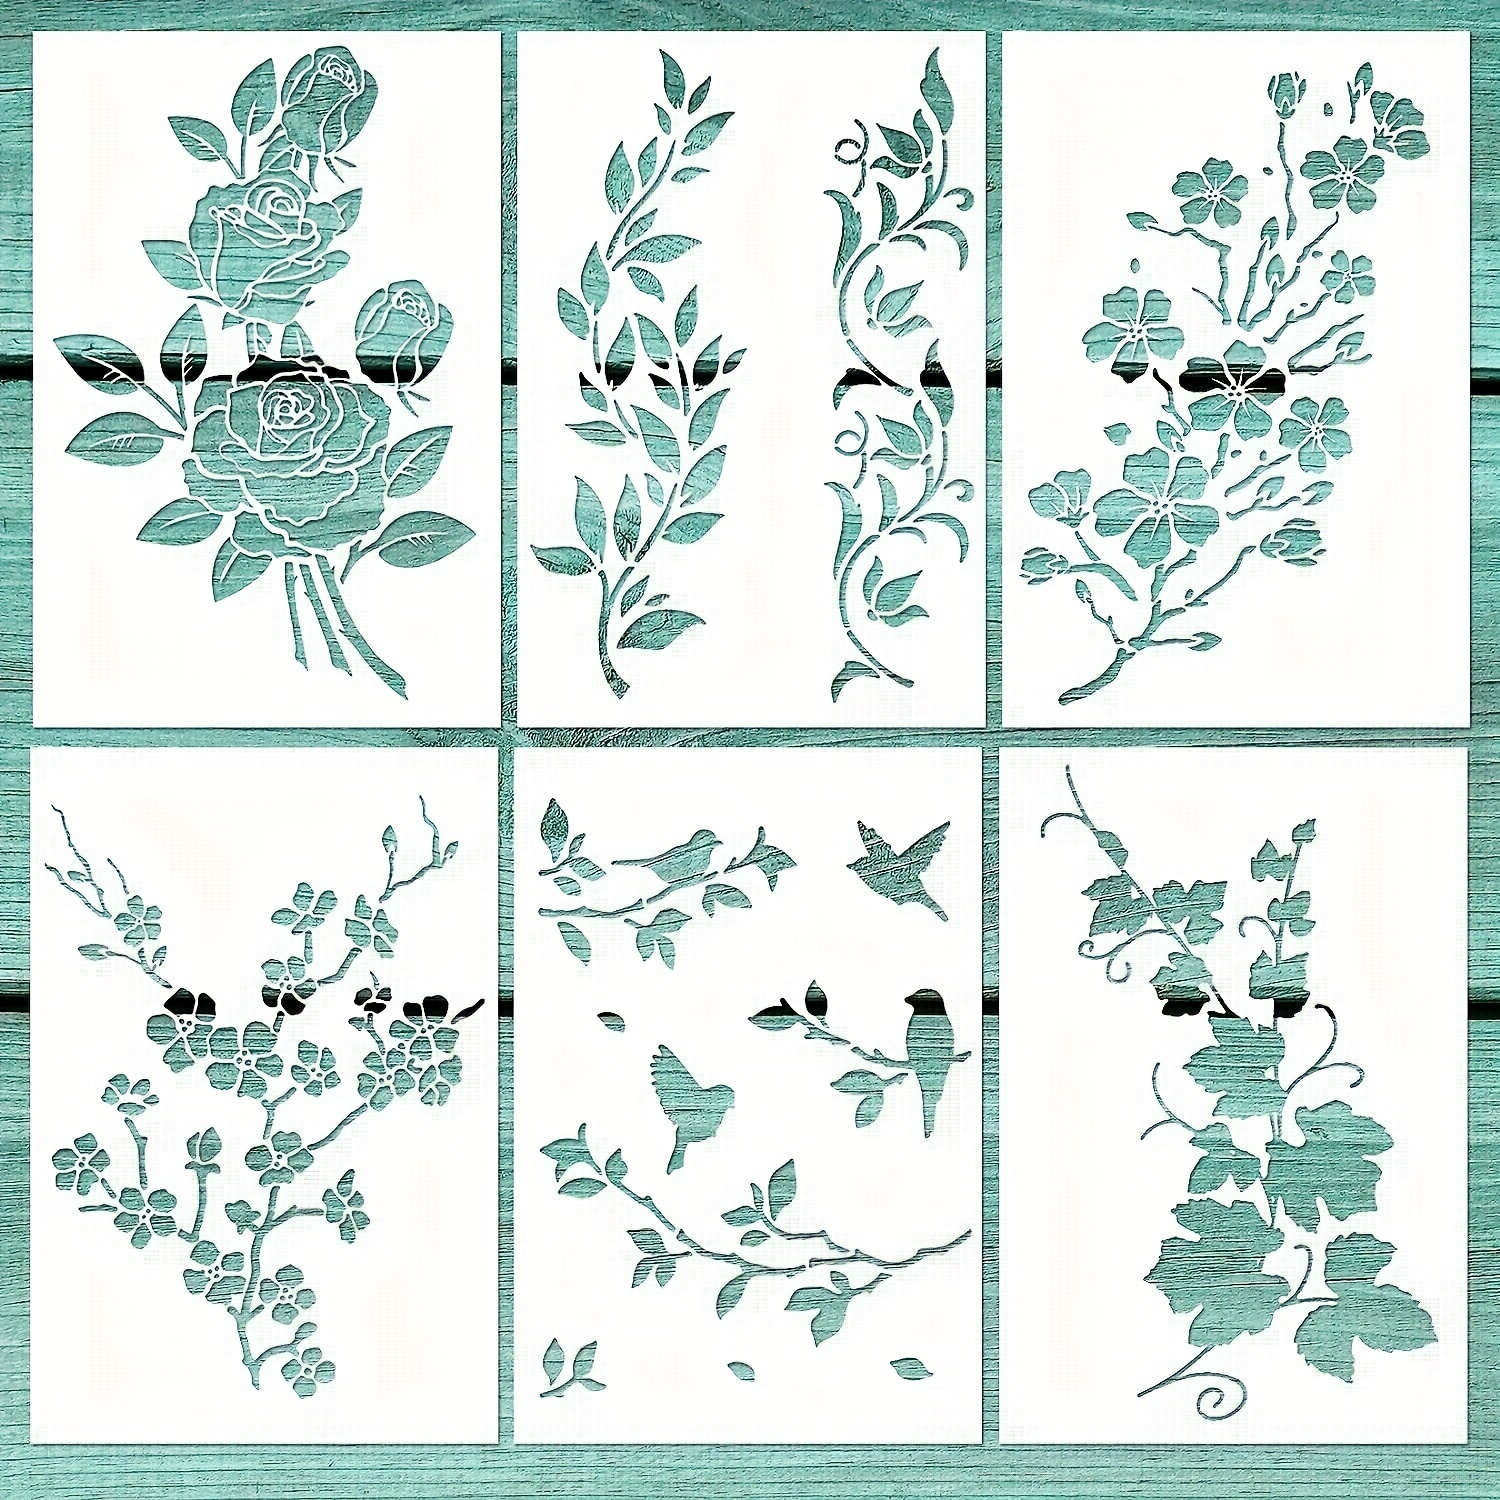 Botanical Flower Stencils for Crafts Small Wildflower Floral Paint Stencil  for Painting on Wood Card Making, Tiny Nature Vine Herb Essential Art